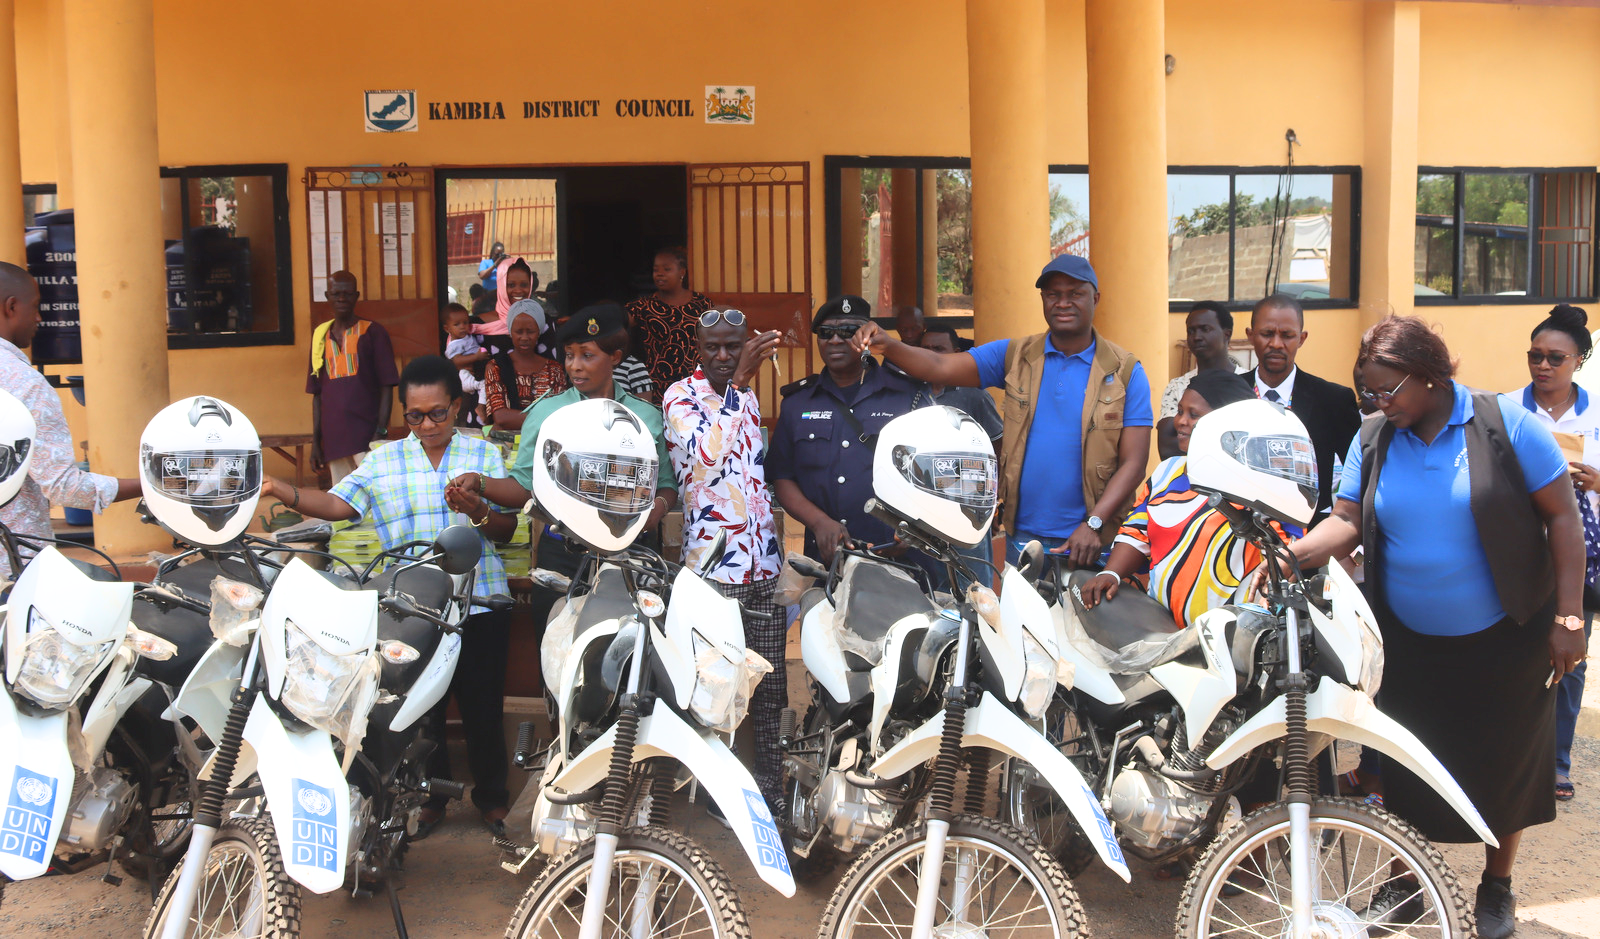 Kambia District Council… Five XL Honda Motorbikes worth SLE325, 000 Not Distributed to Beneficiaries